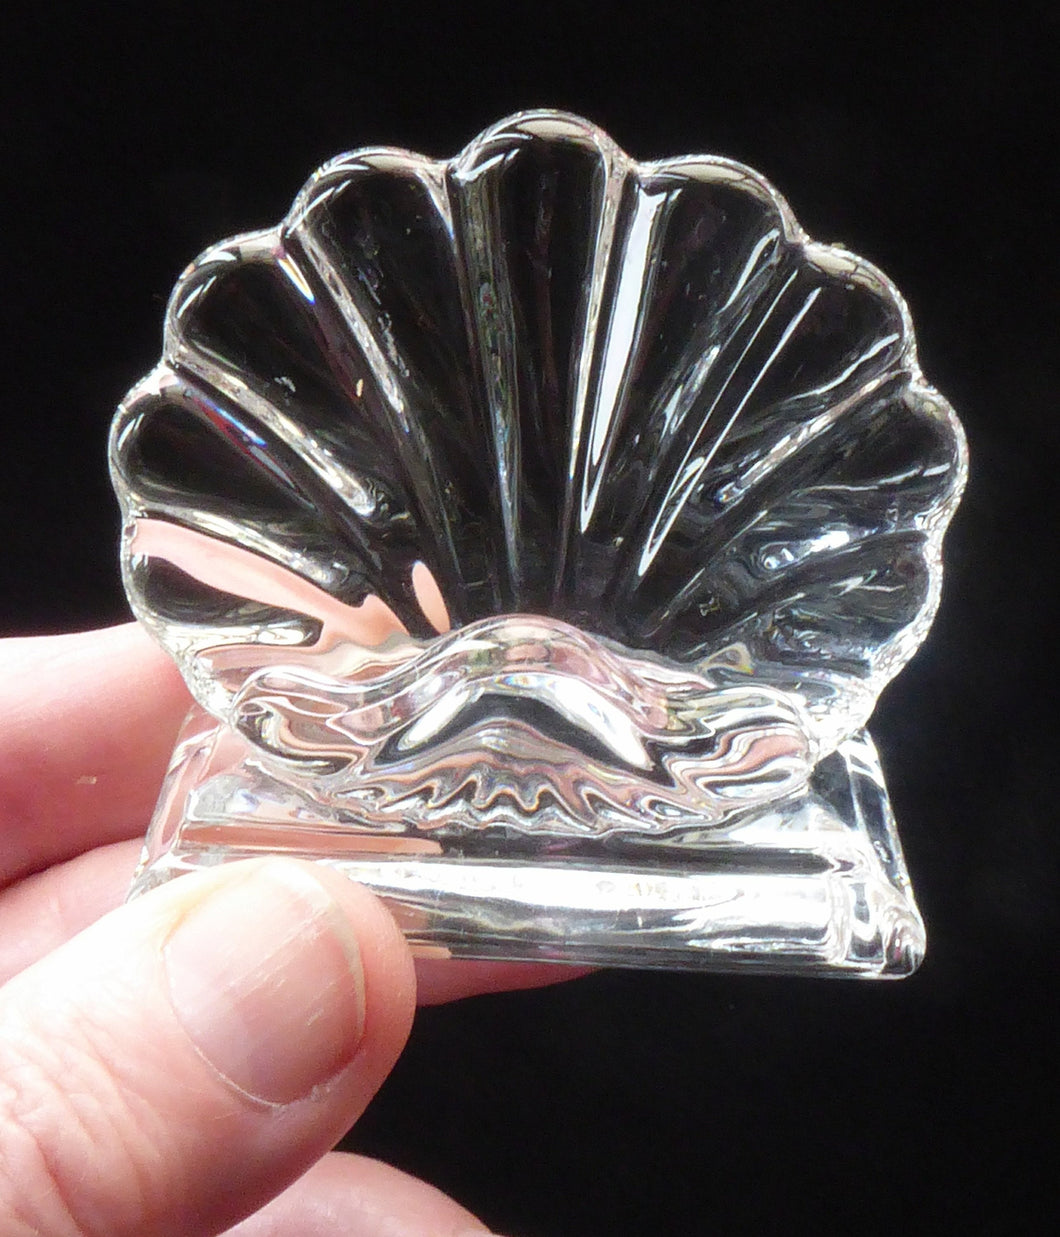 Baccarat Crystal Bambous Shell Menu Holders or Place Settings. Matching Set of Four